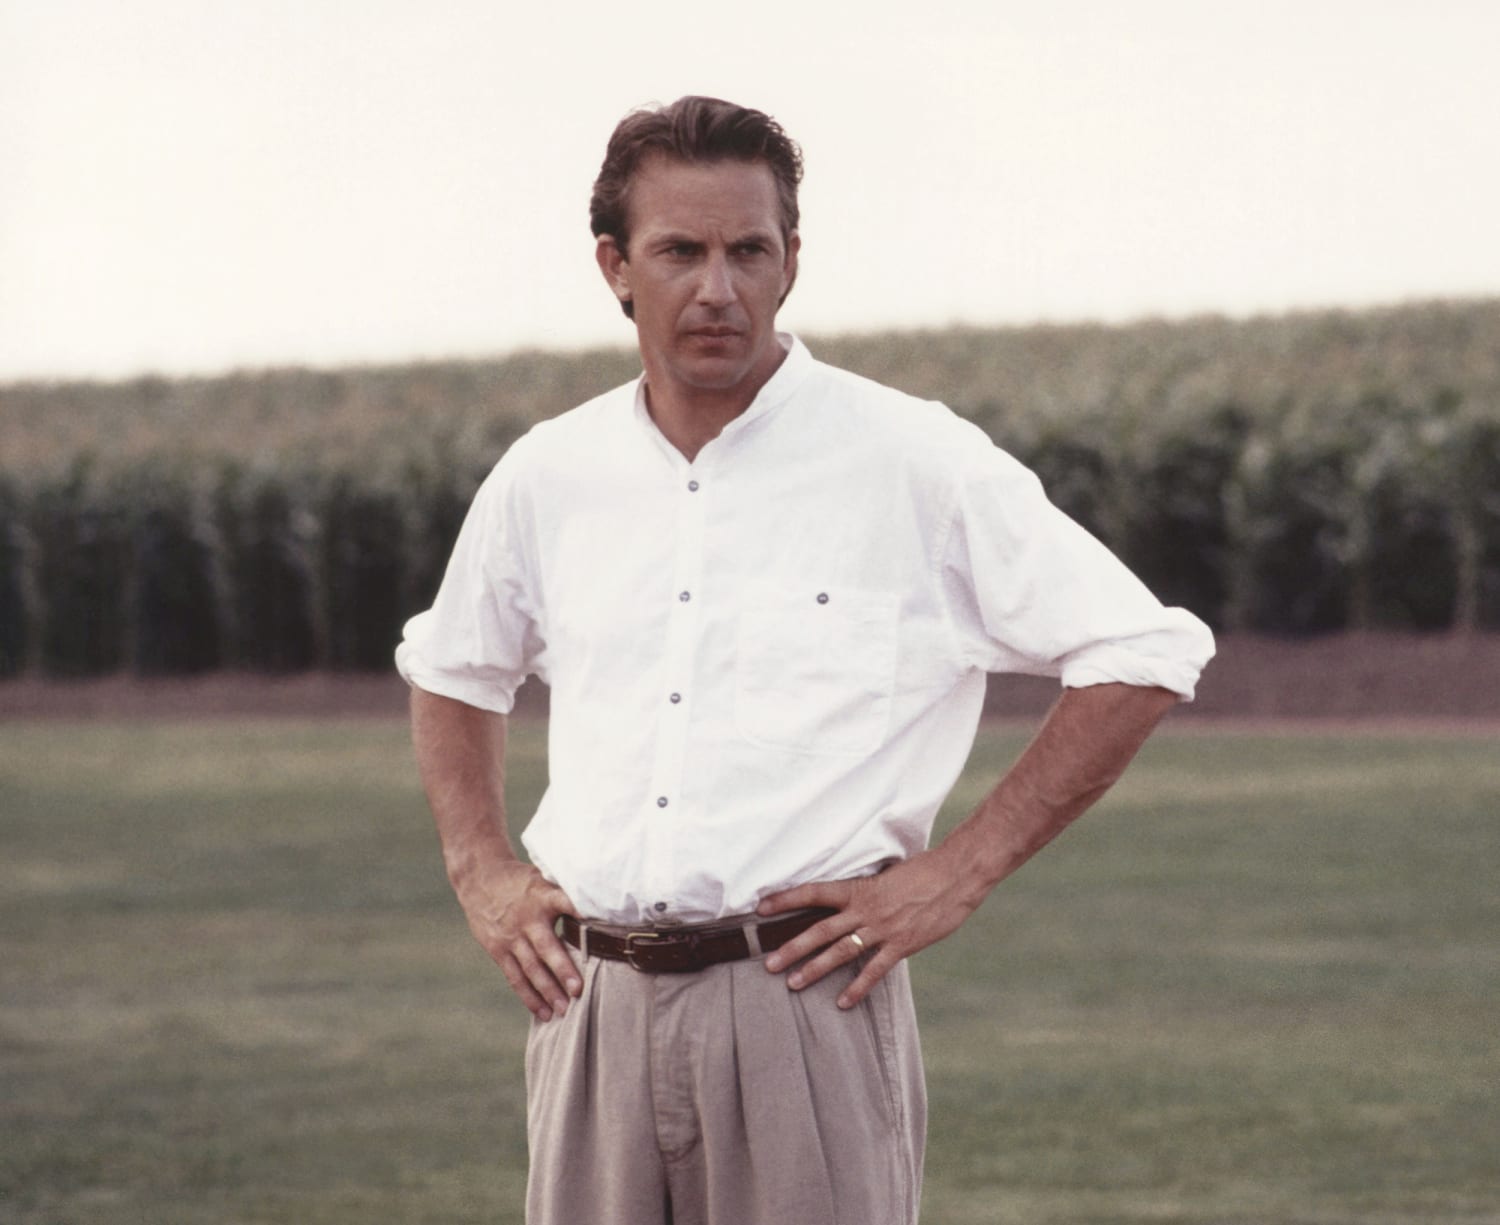 Field of Dreams' legal game plays out in courtroom